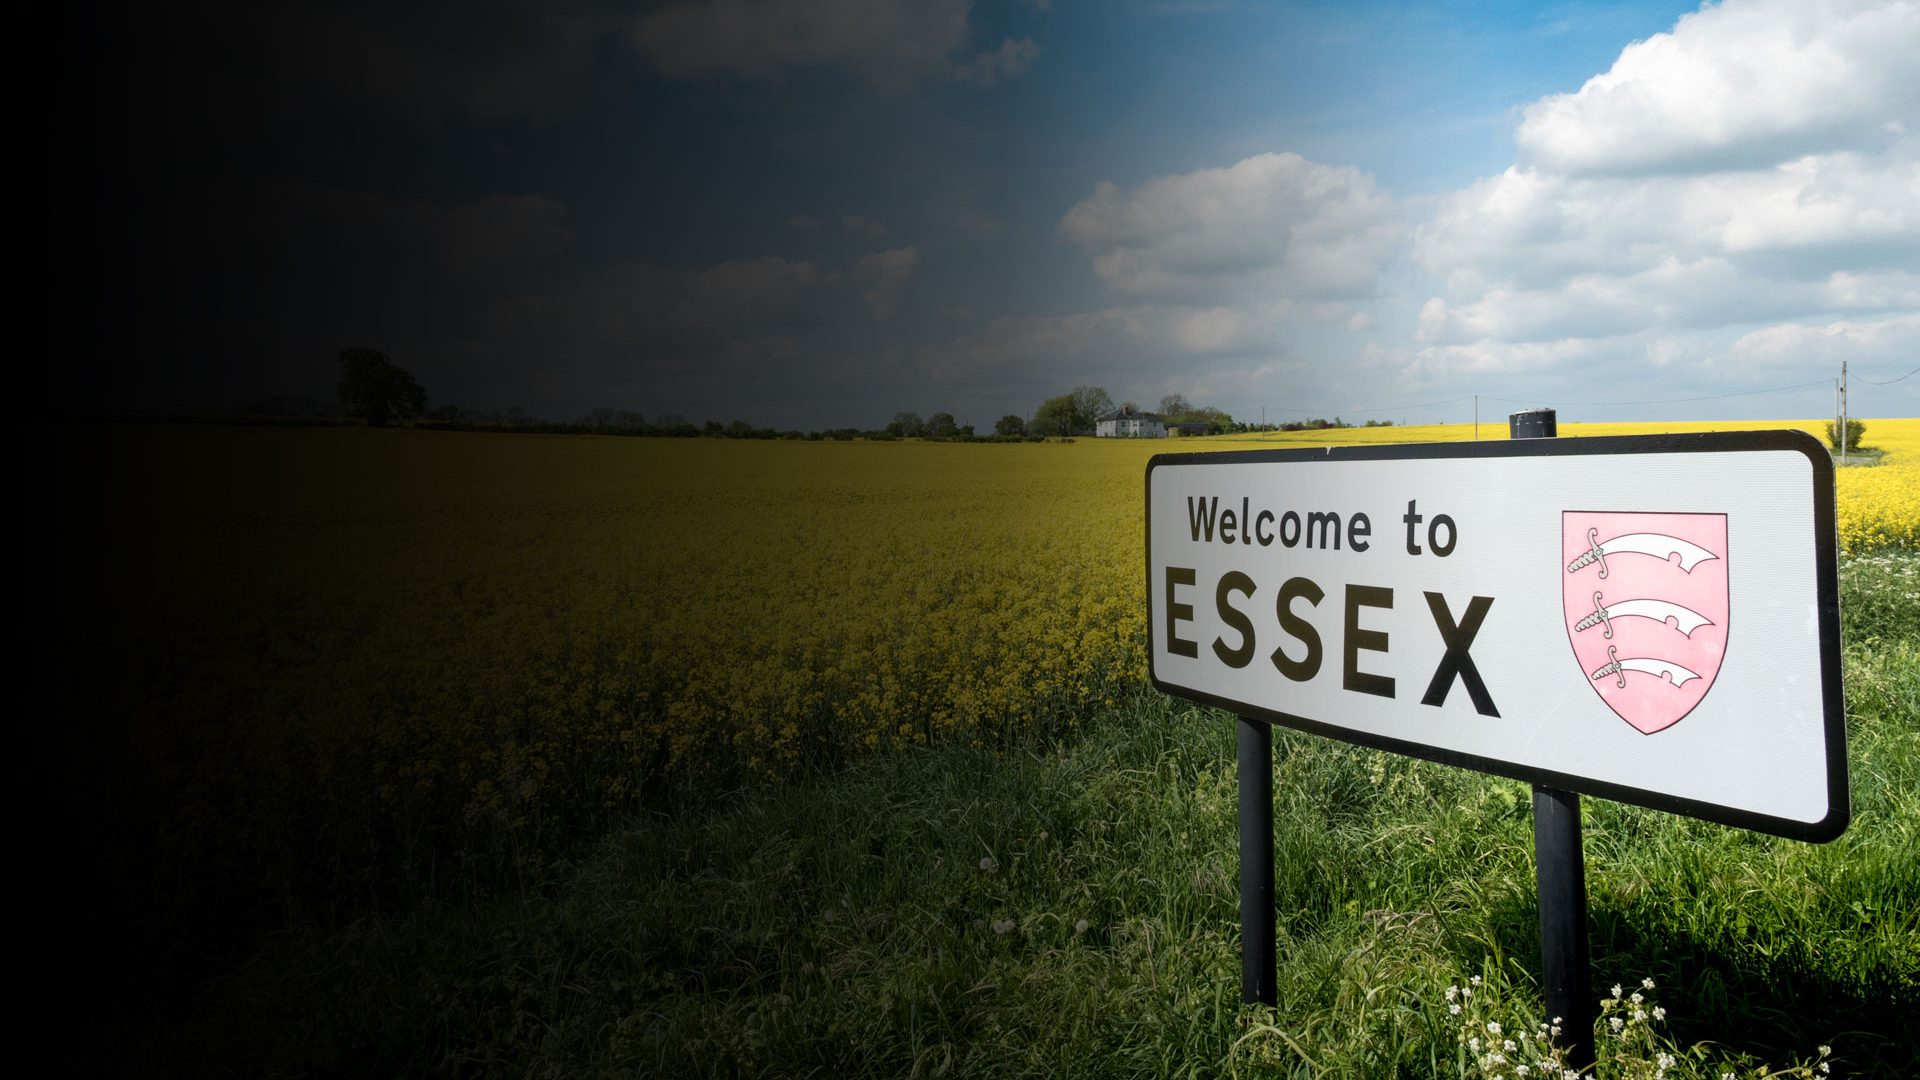 Essex welcome sign